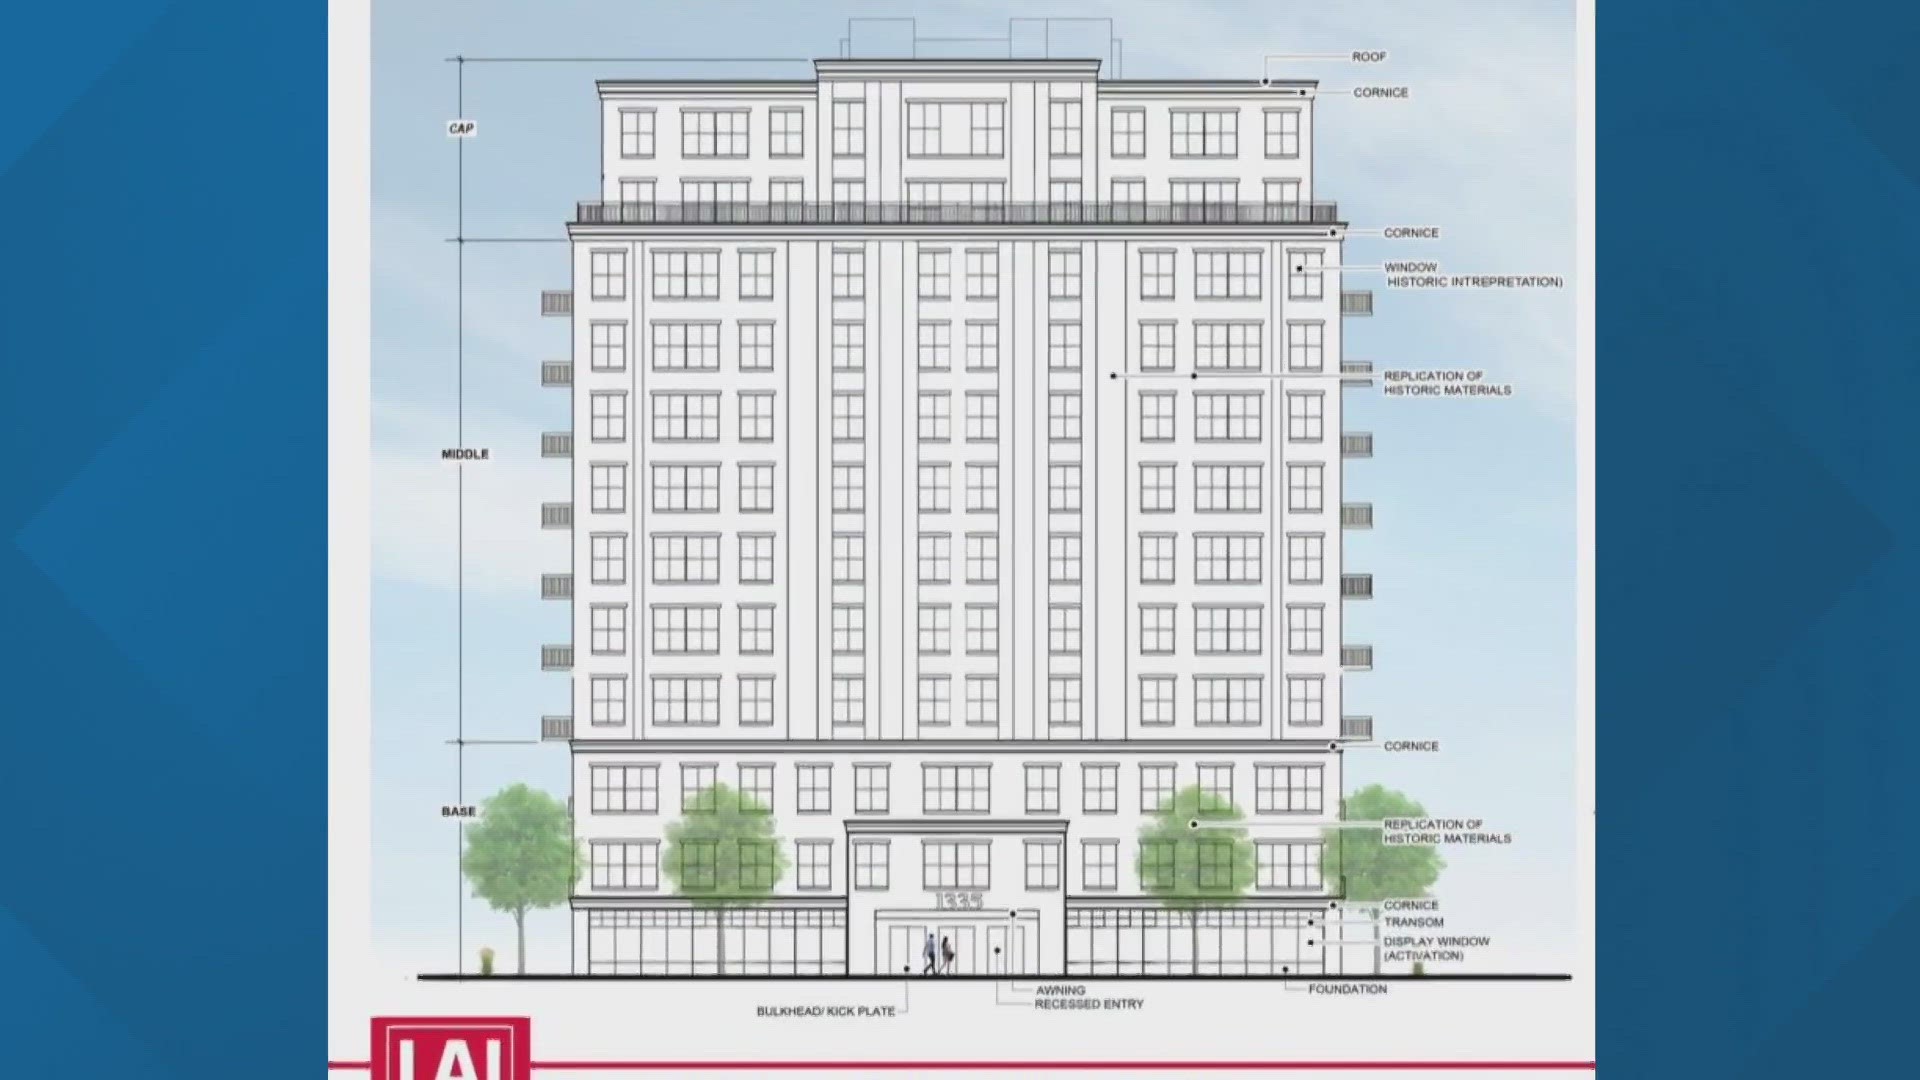 The city's Landmark Preservation Commission turned down a proposal from a church to build an apartment complex in its downtown parking lot.